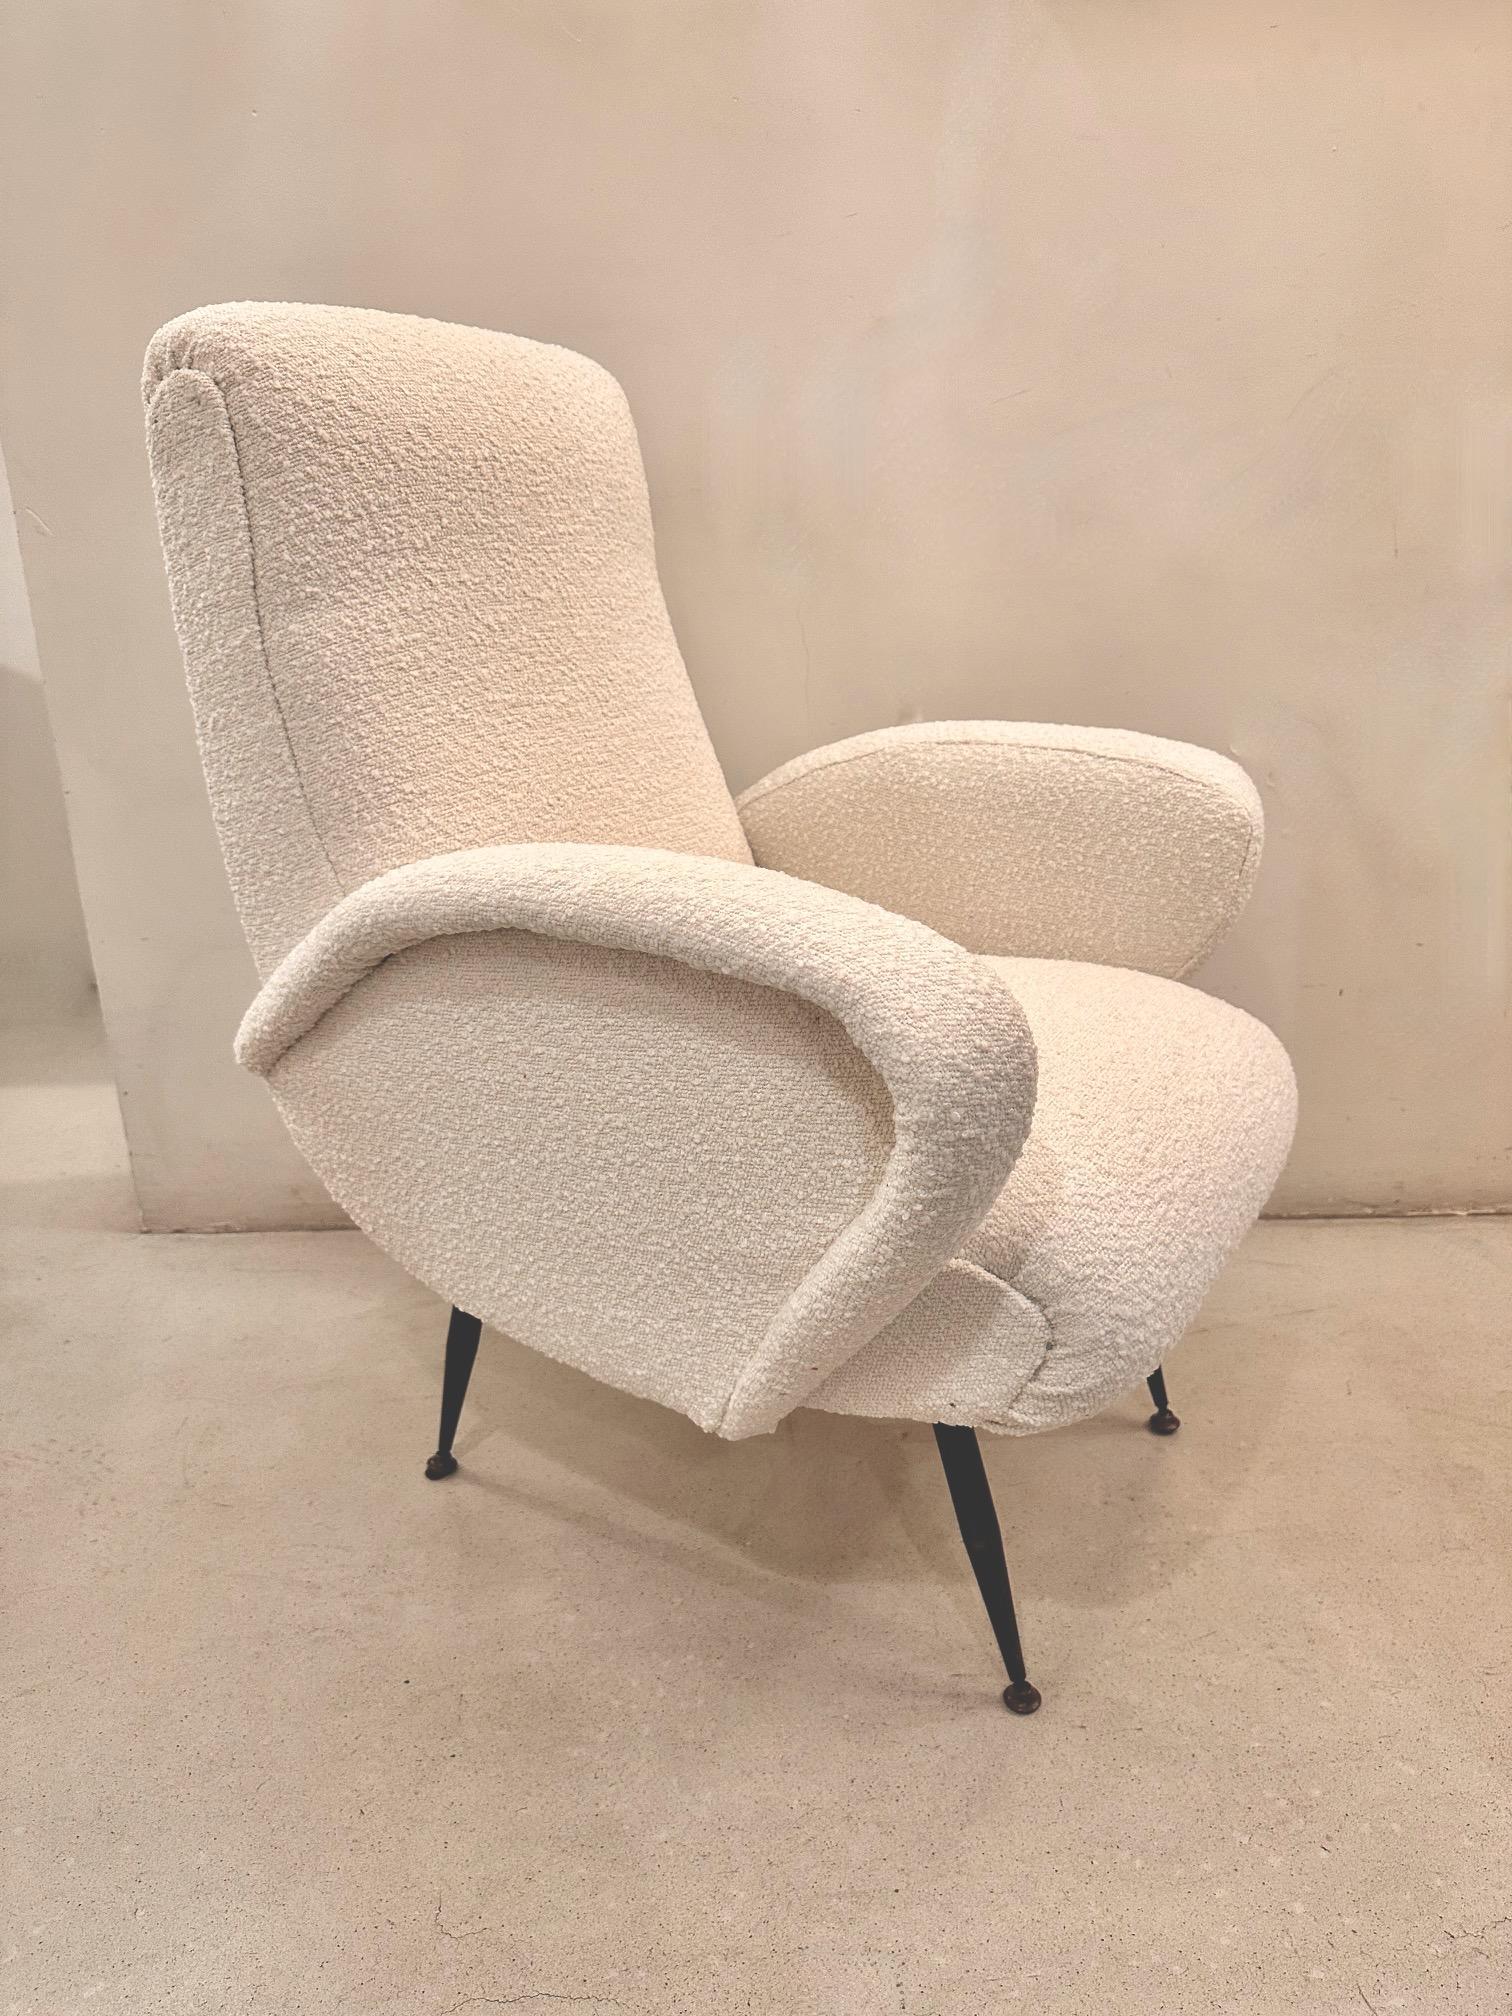 Mid-20th Century Mid-Century Ico Parisi  Pale White Armchairs.Italy 1960 For Sale